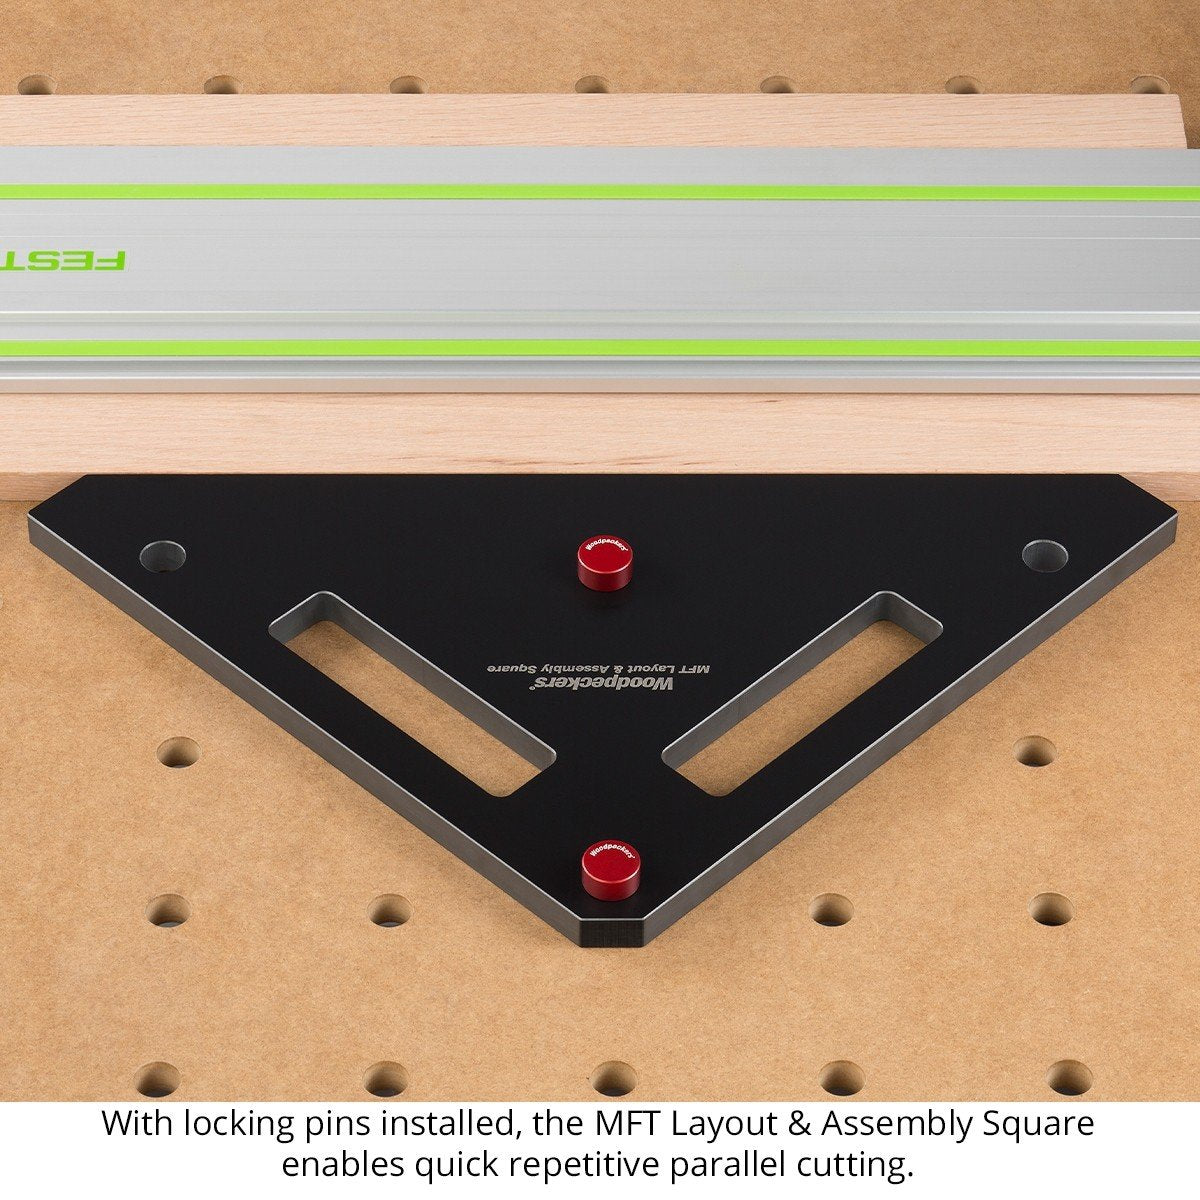 New Woodpeckers MFT Square One Time Tool (Feb 16th Order Deadline)